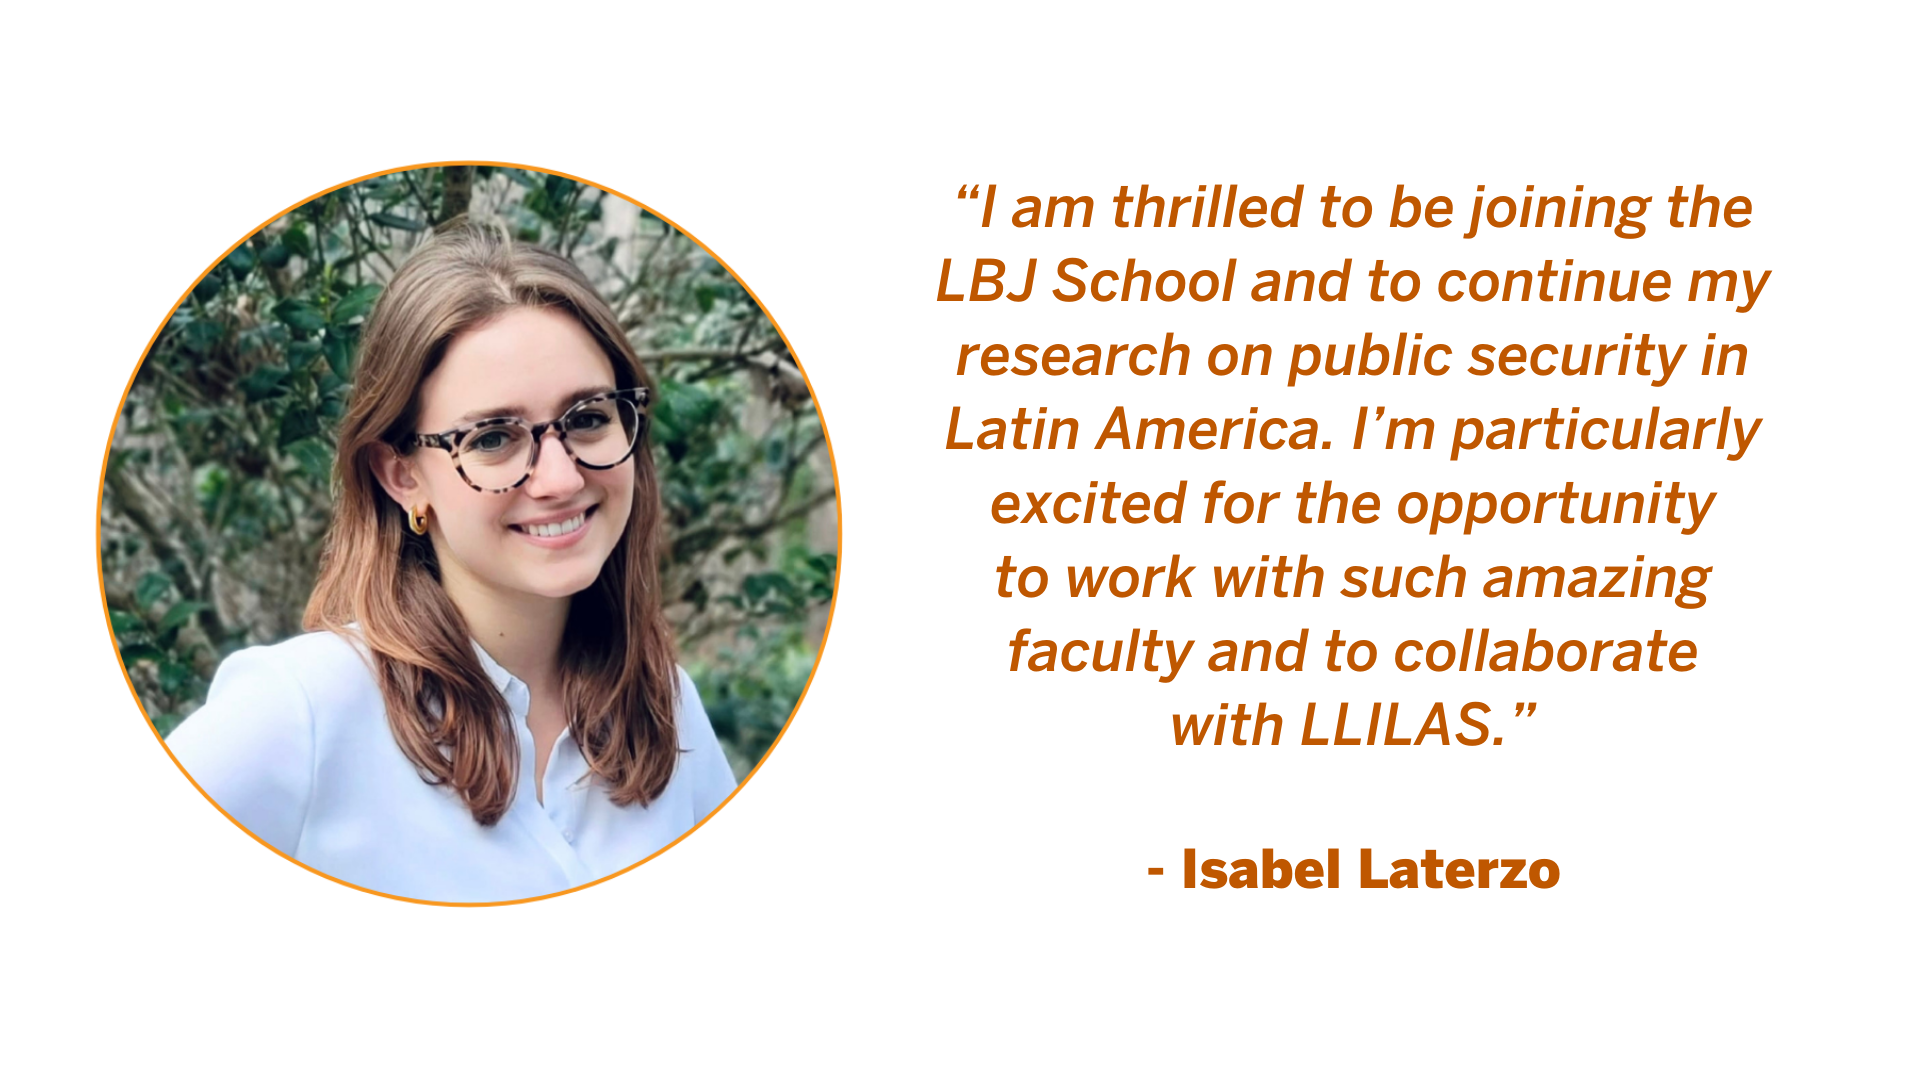 Isabel Laterzo Quote: “I am thrilled to be joining the LBJ School and to continue my research on public security in Latin America. I’m particularly excited for the opportunity to work with such amazing faculty and to collaborate with LLILAS.”